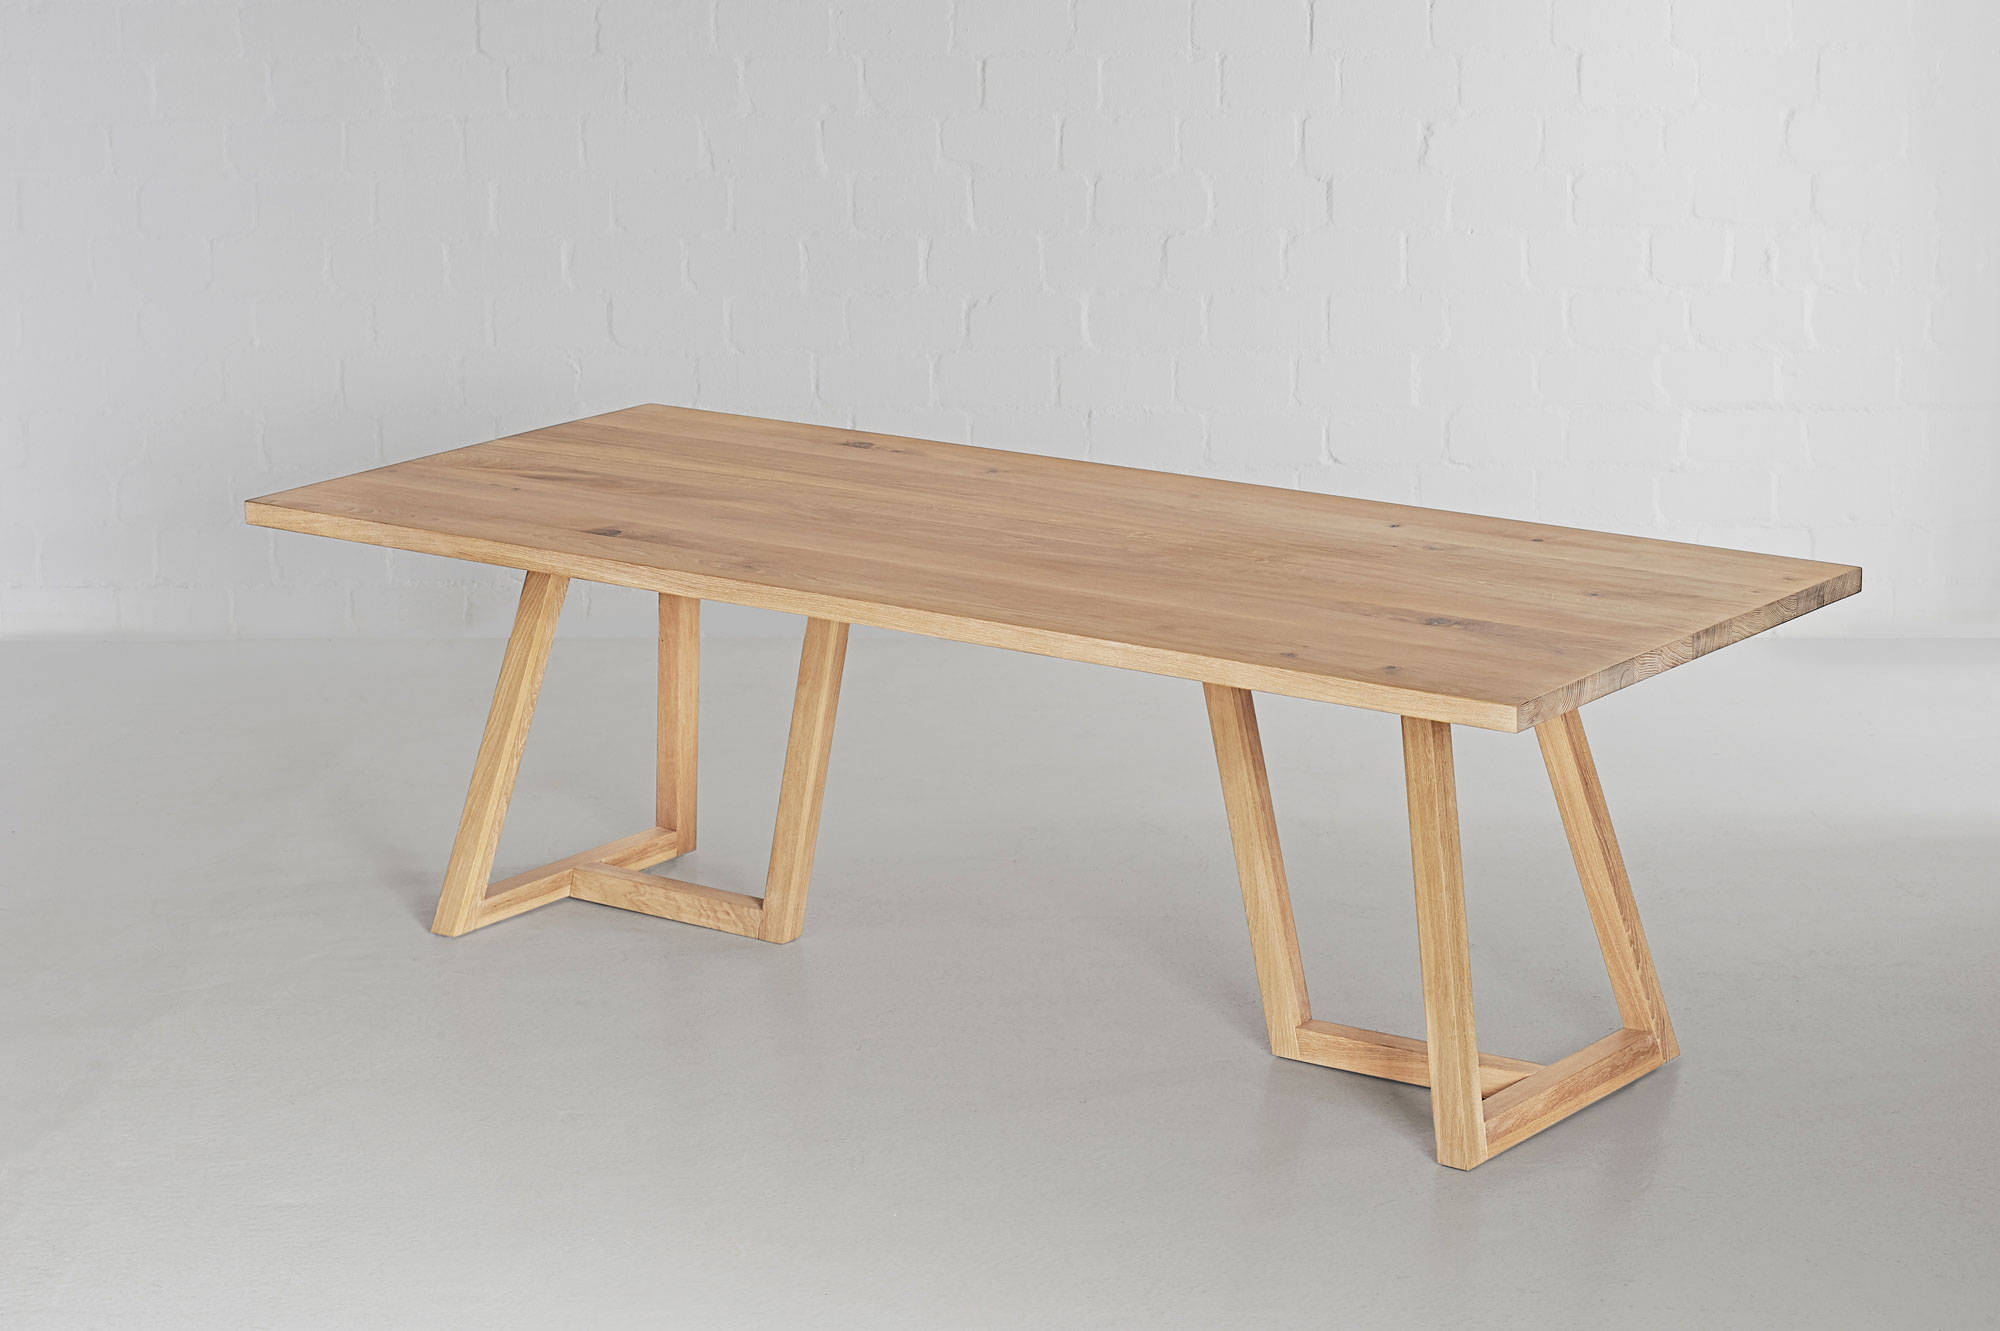 Designer Solid Wood Table MARGO 0351 custom made in solid wood by vitamin design